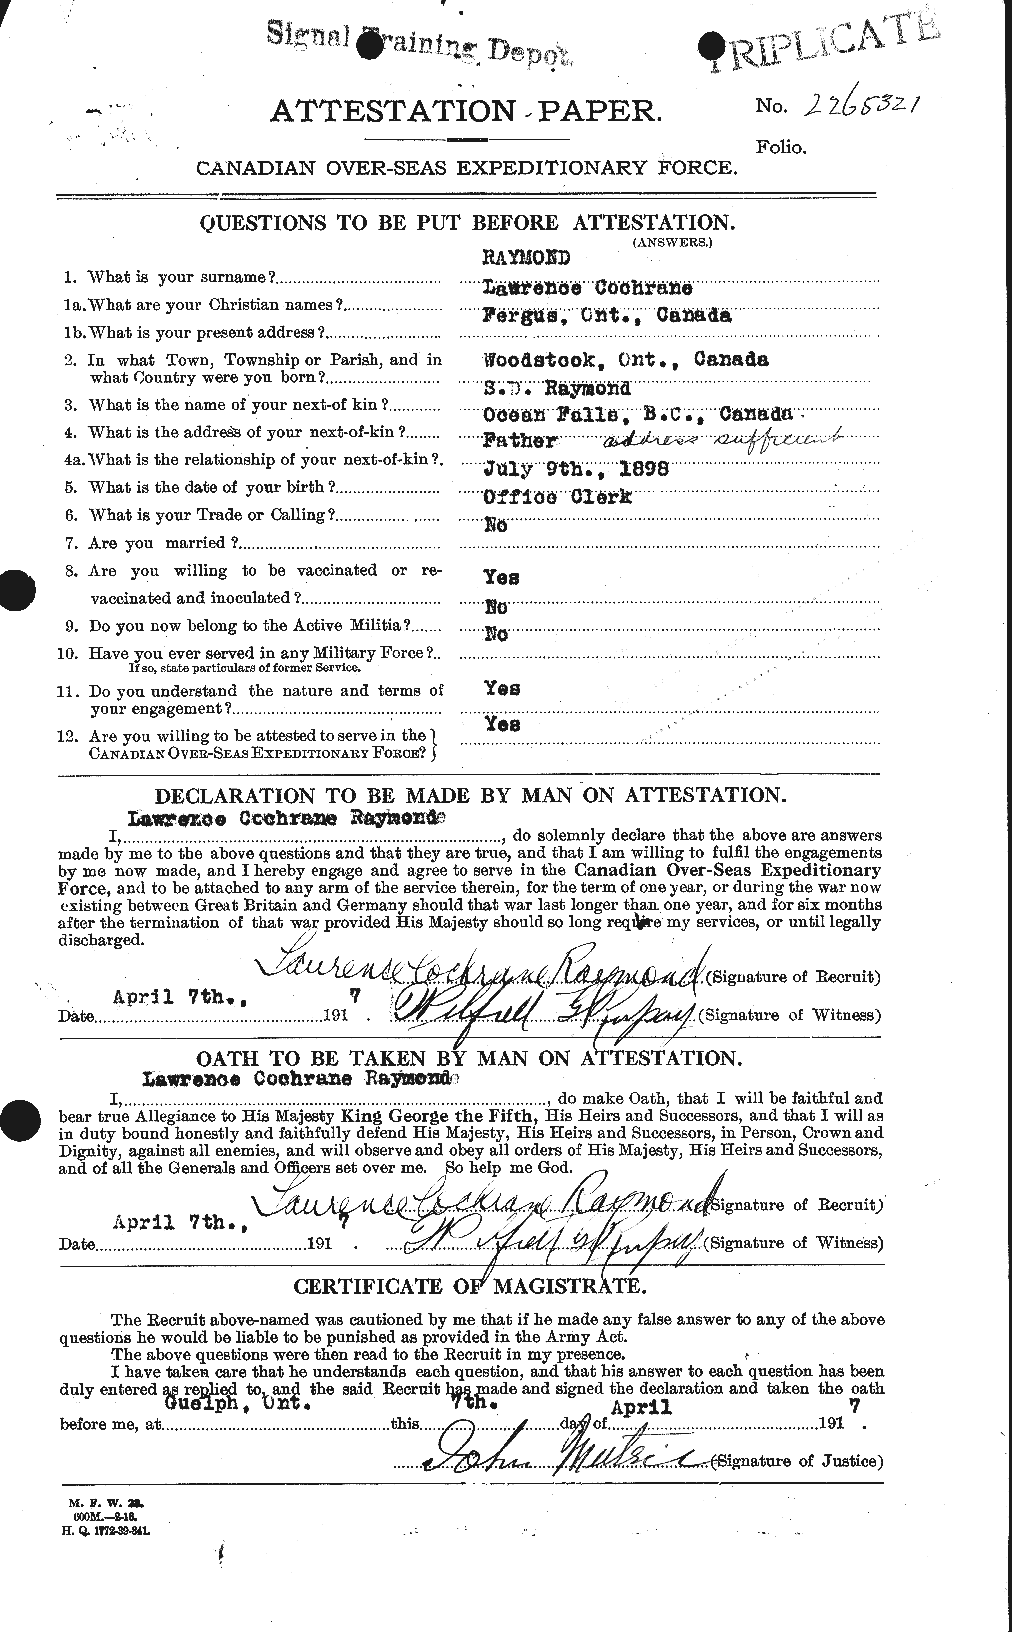 Personnel Records of the First World War - CEF 595409a